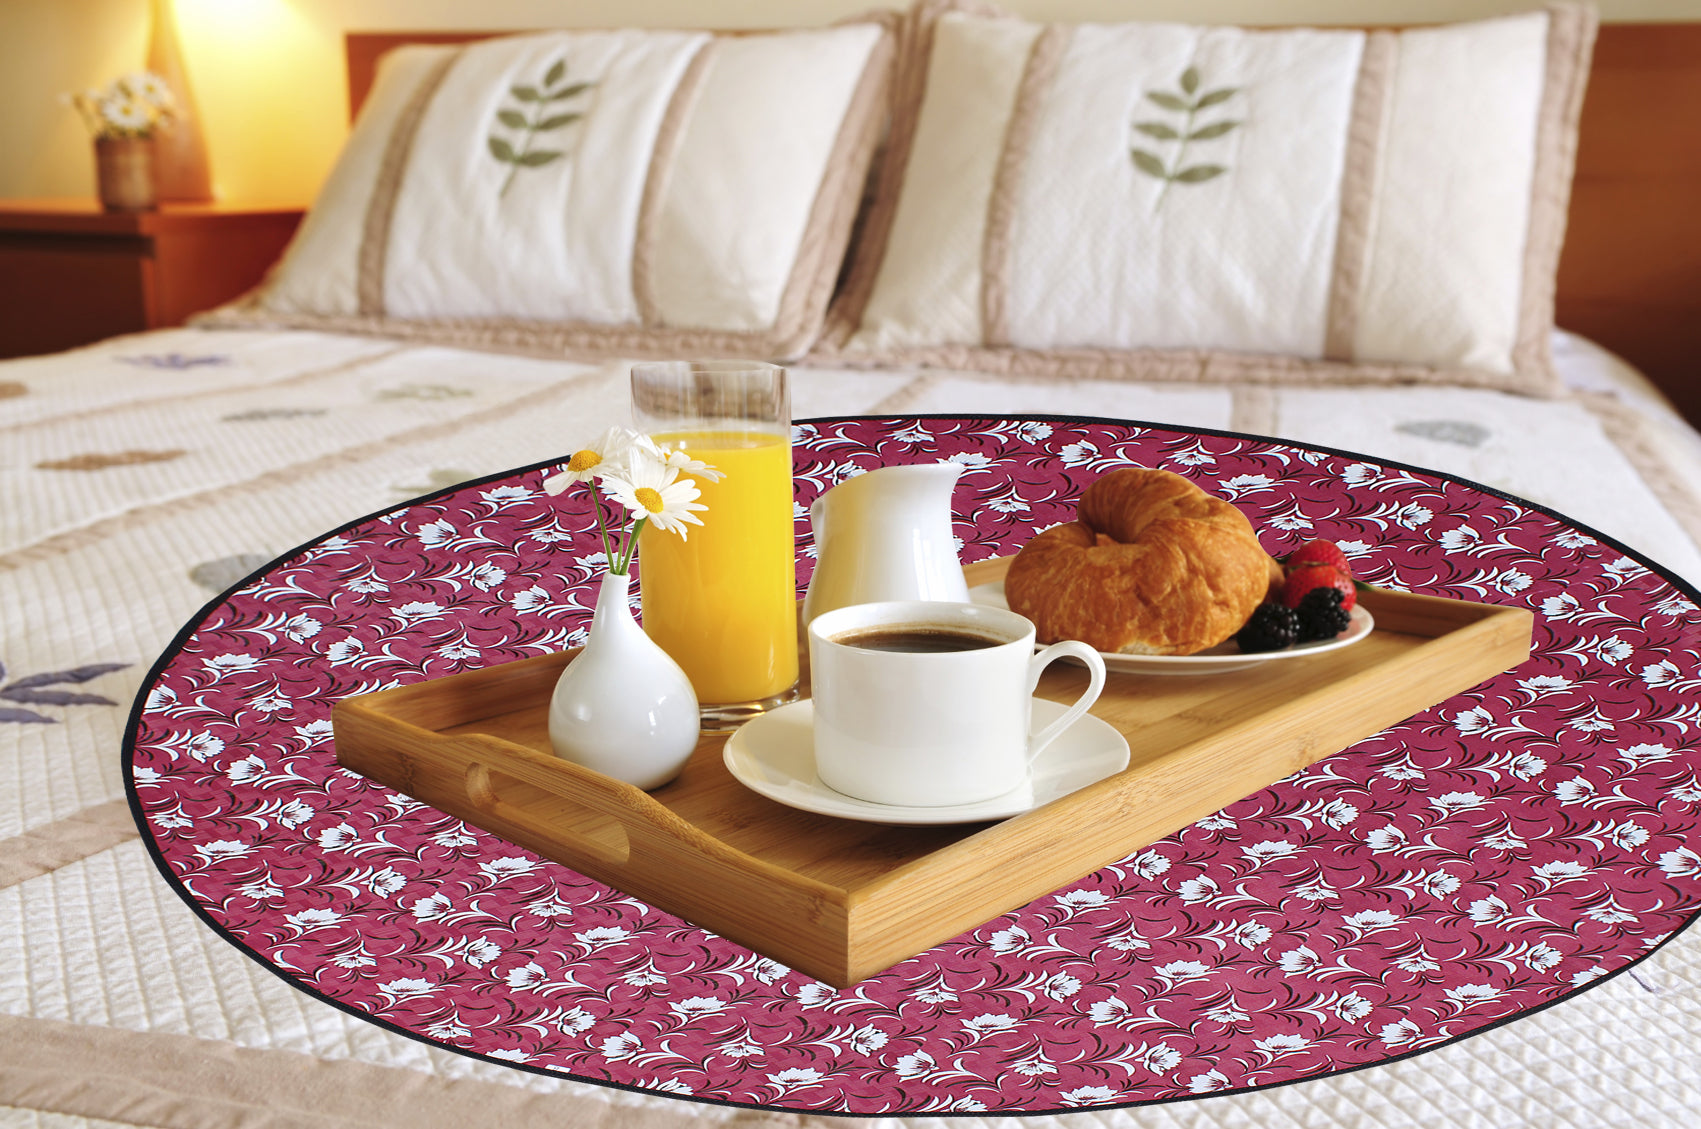 Waterproof & Oil Proof Bed Server Circle Mat, SA48 - Dream Care Furnishings Private Limited